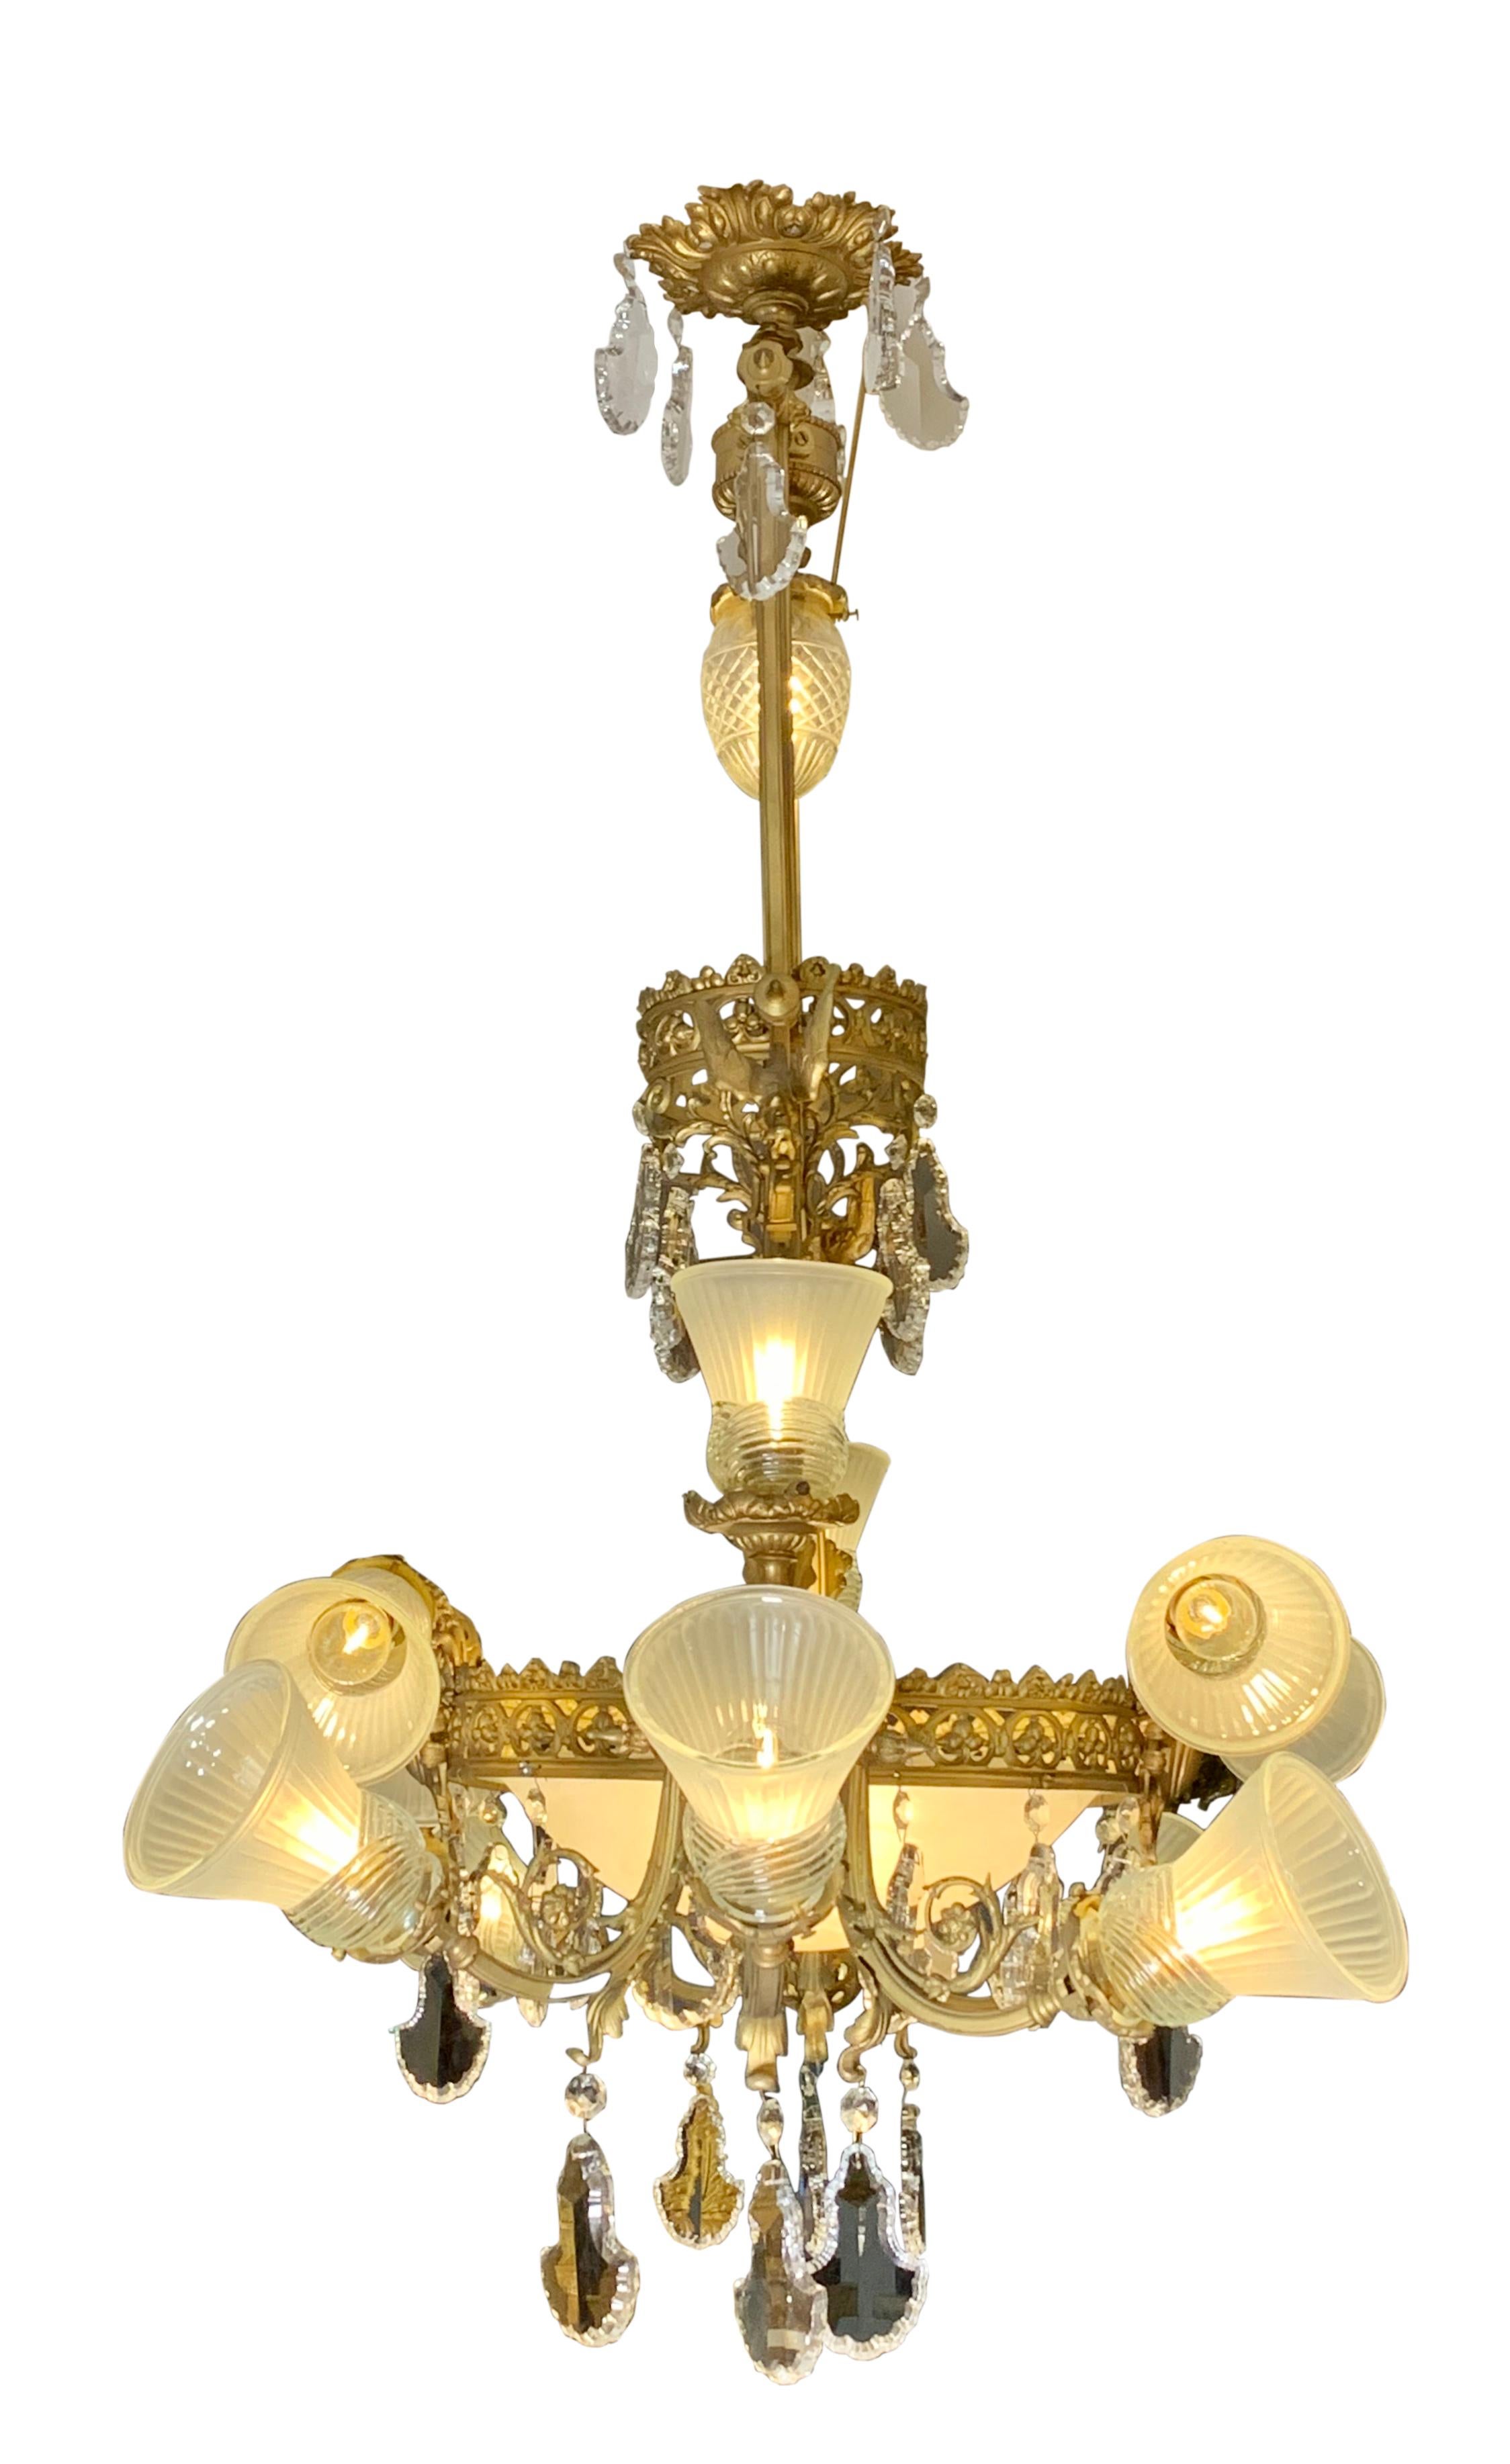 19th Century French Gilt Bronze and Crystal Twelve-Light Chandelier with dragons For Sale 2